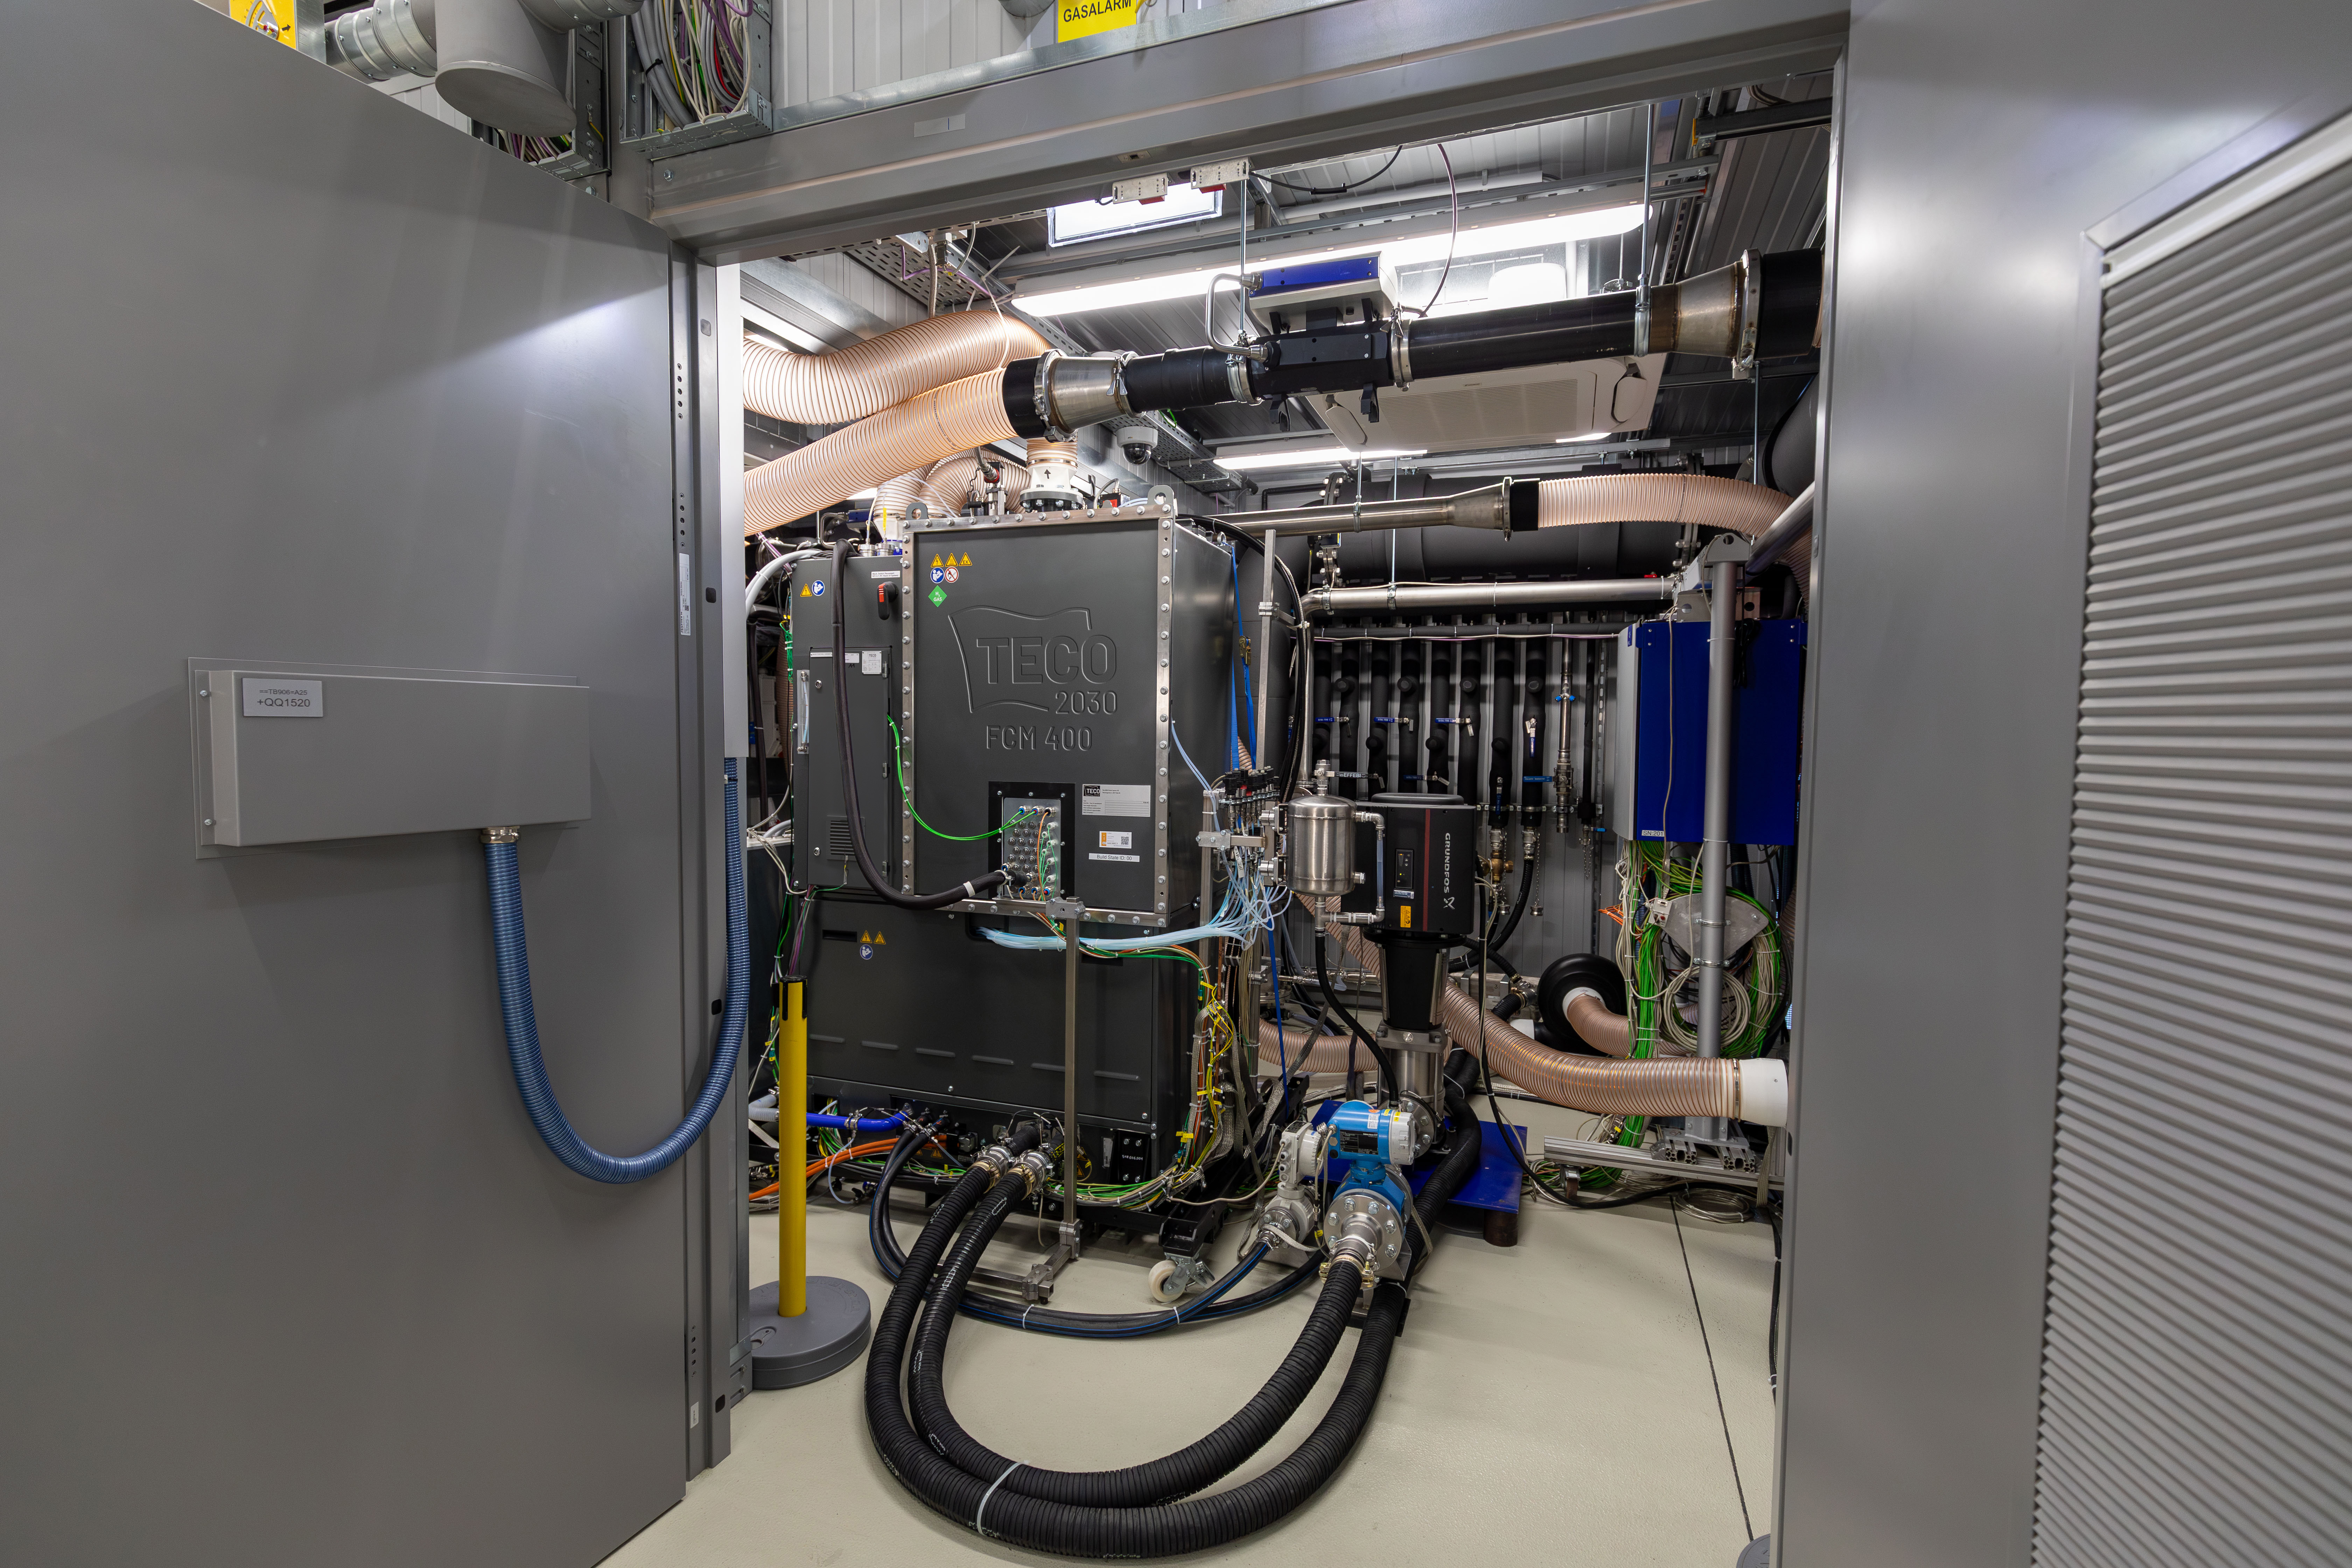 TECO 2030’s fuel cell system connected on the testbed at AVL’s facility in Graz, Austria.